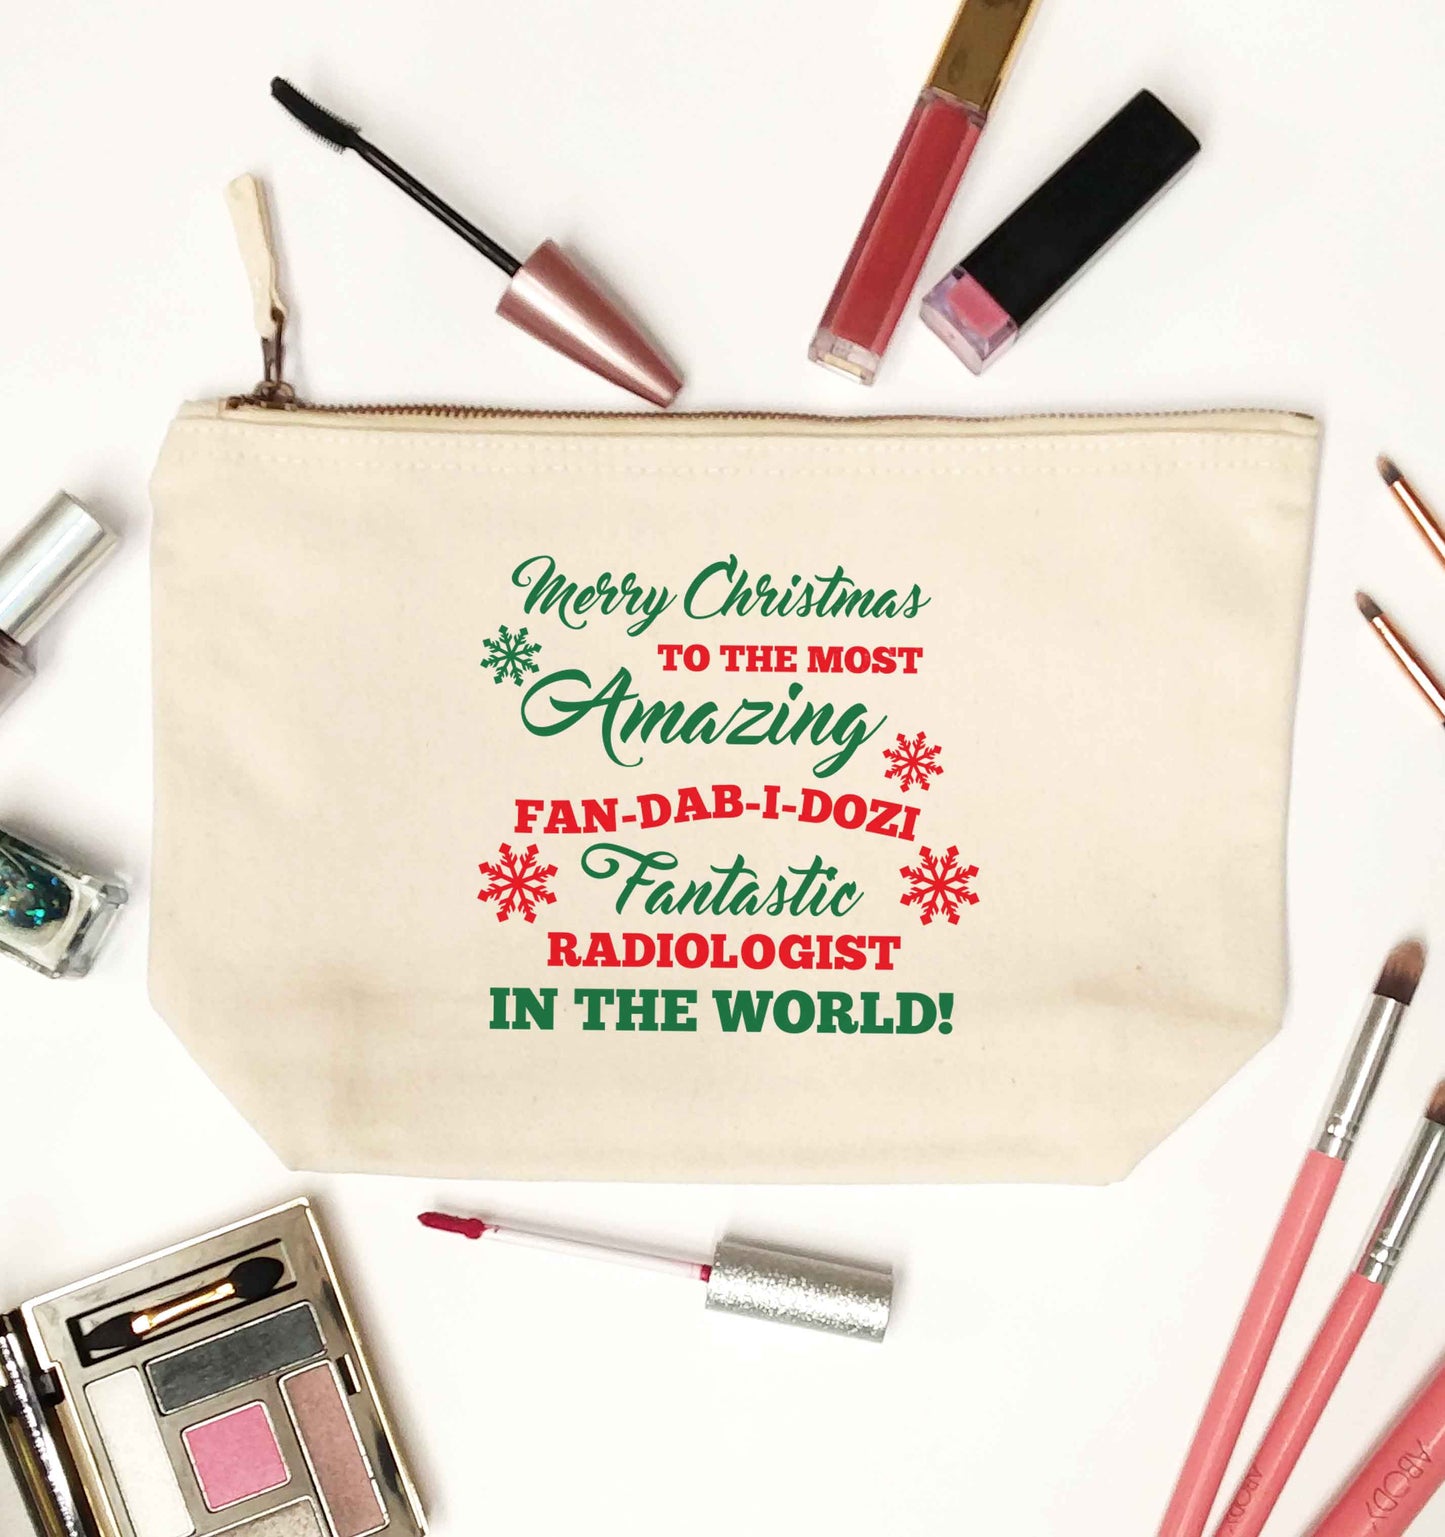 Merry Christmas to the most amazing radiologist in the world! natural makeup bag